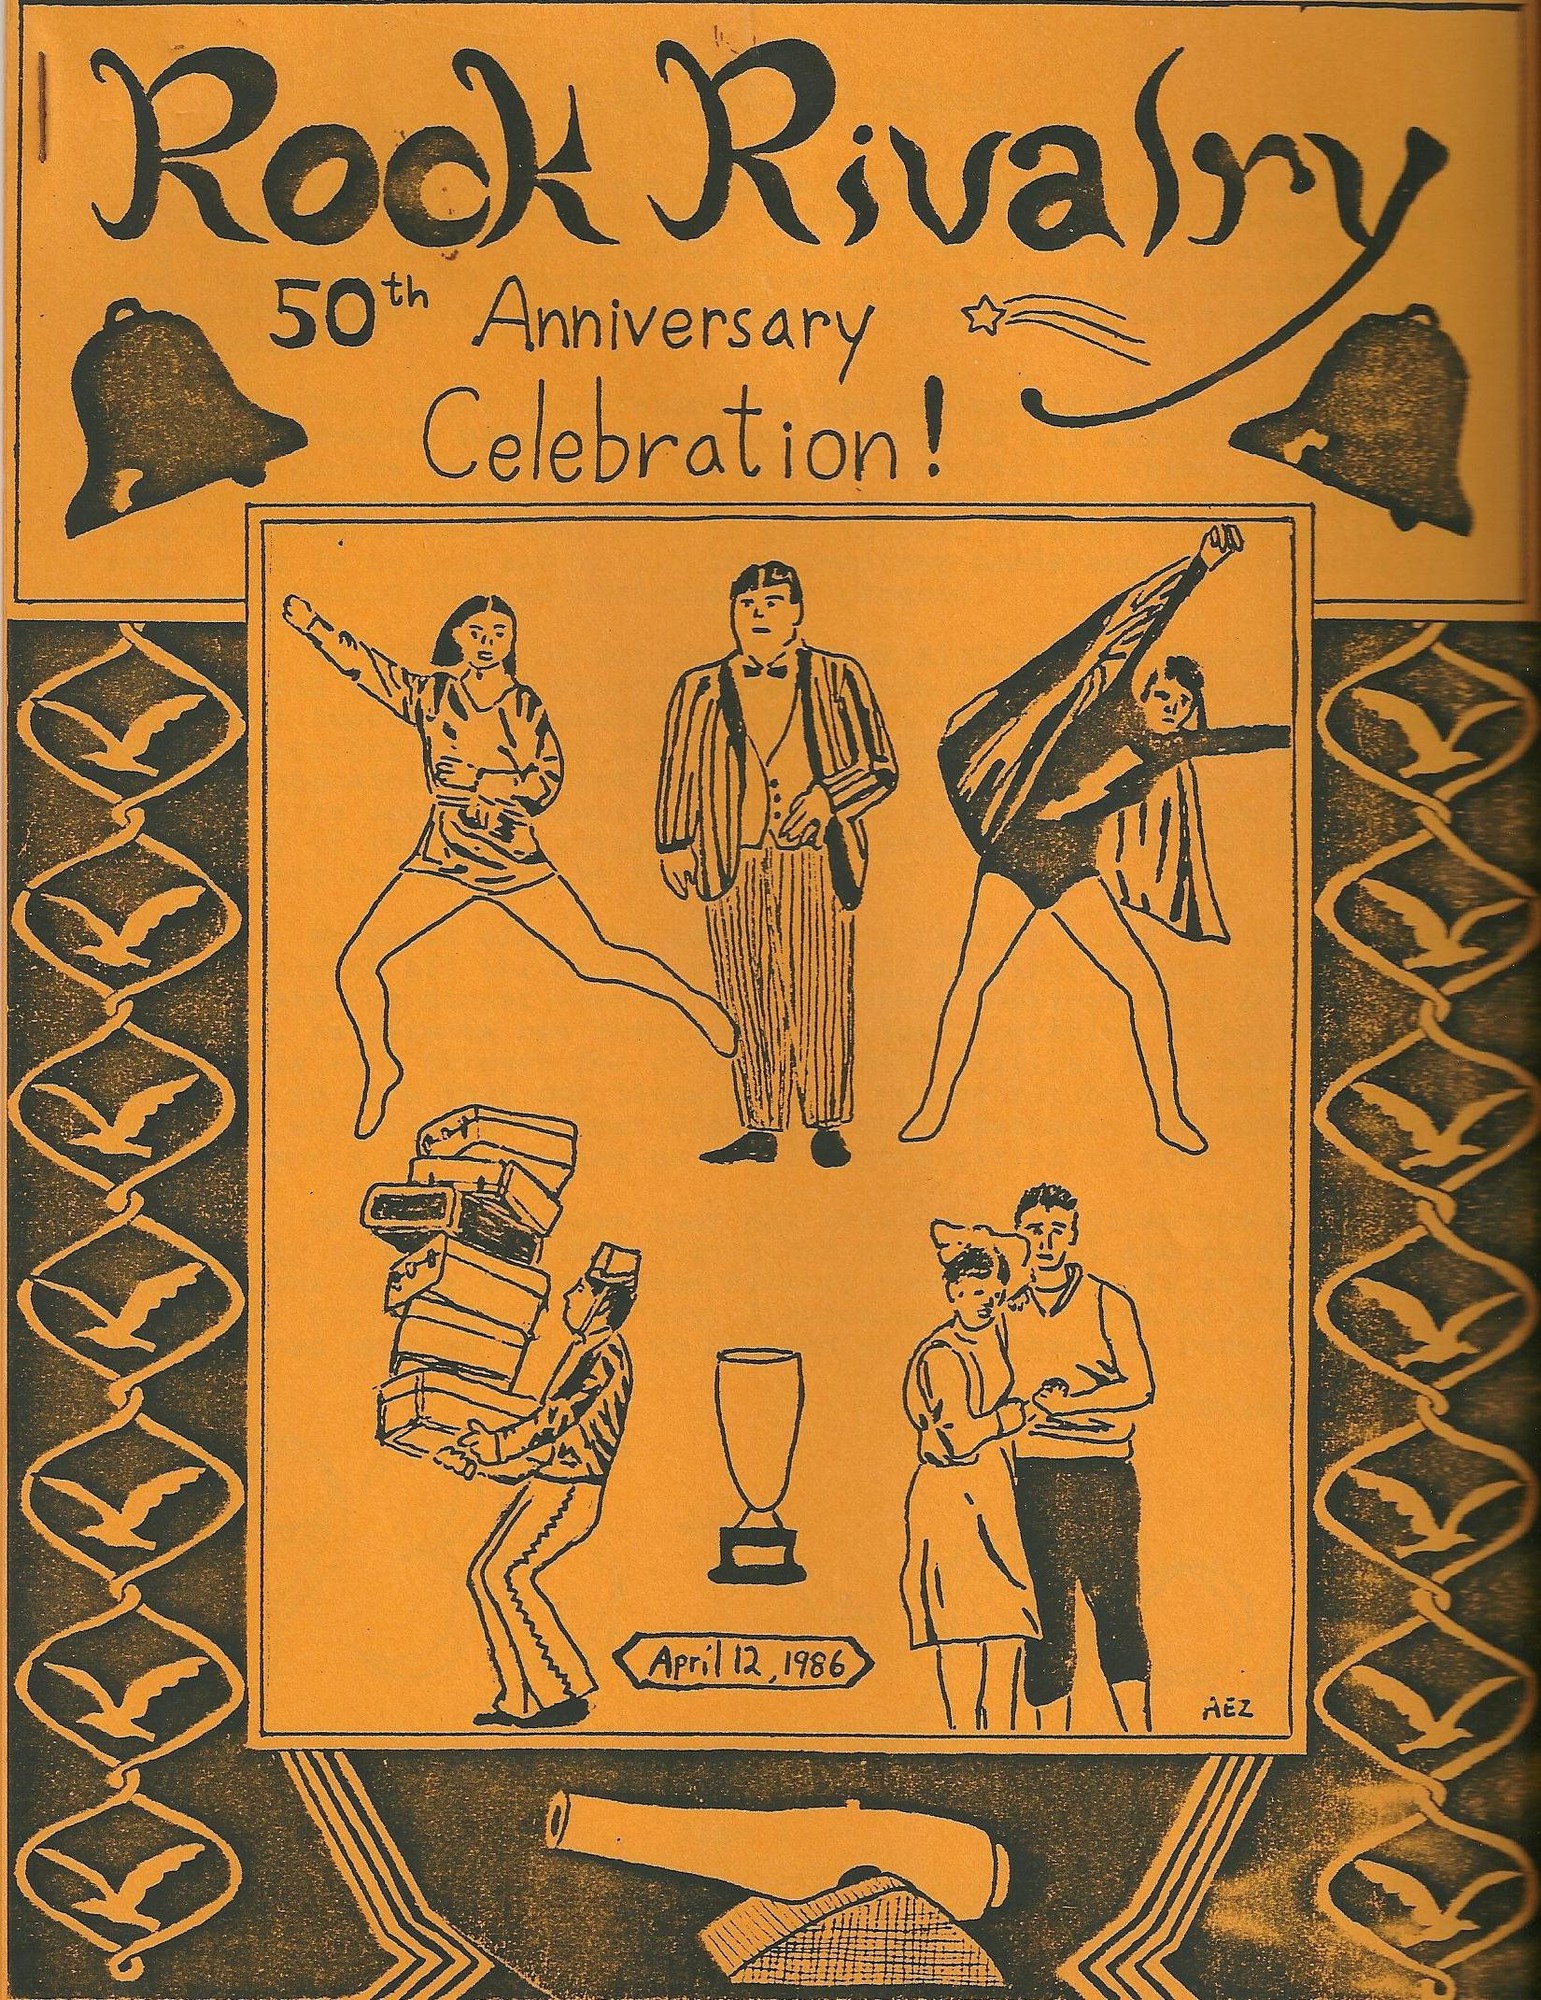 The program for the 50th anniversary celebration of Rock Rivalry.